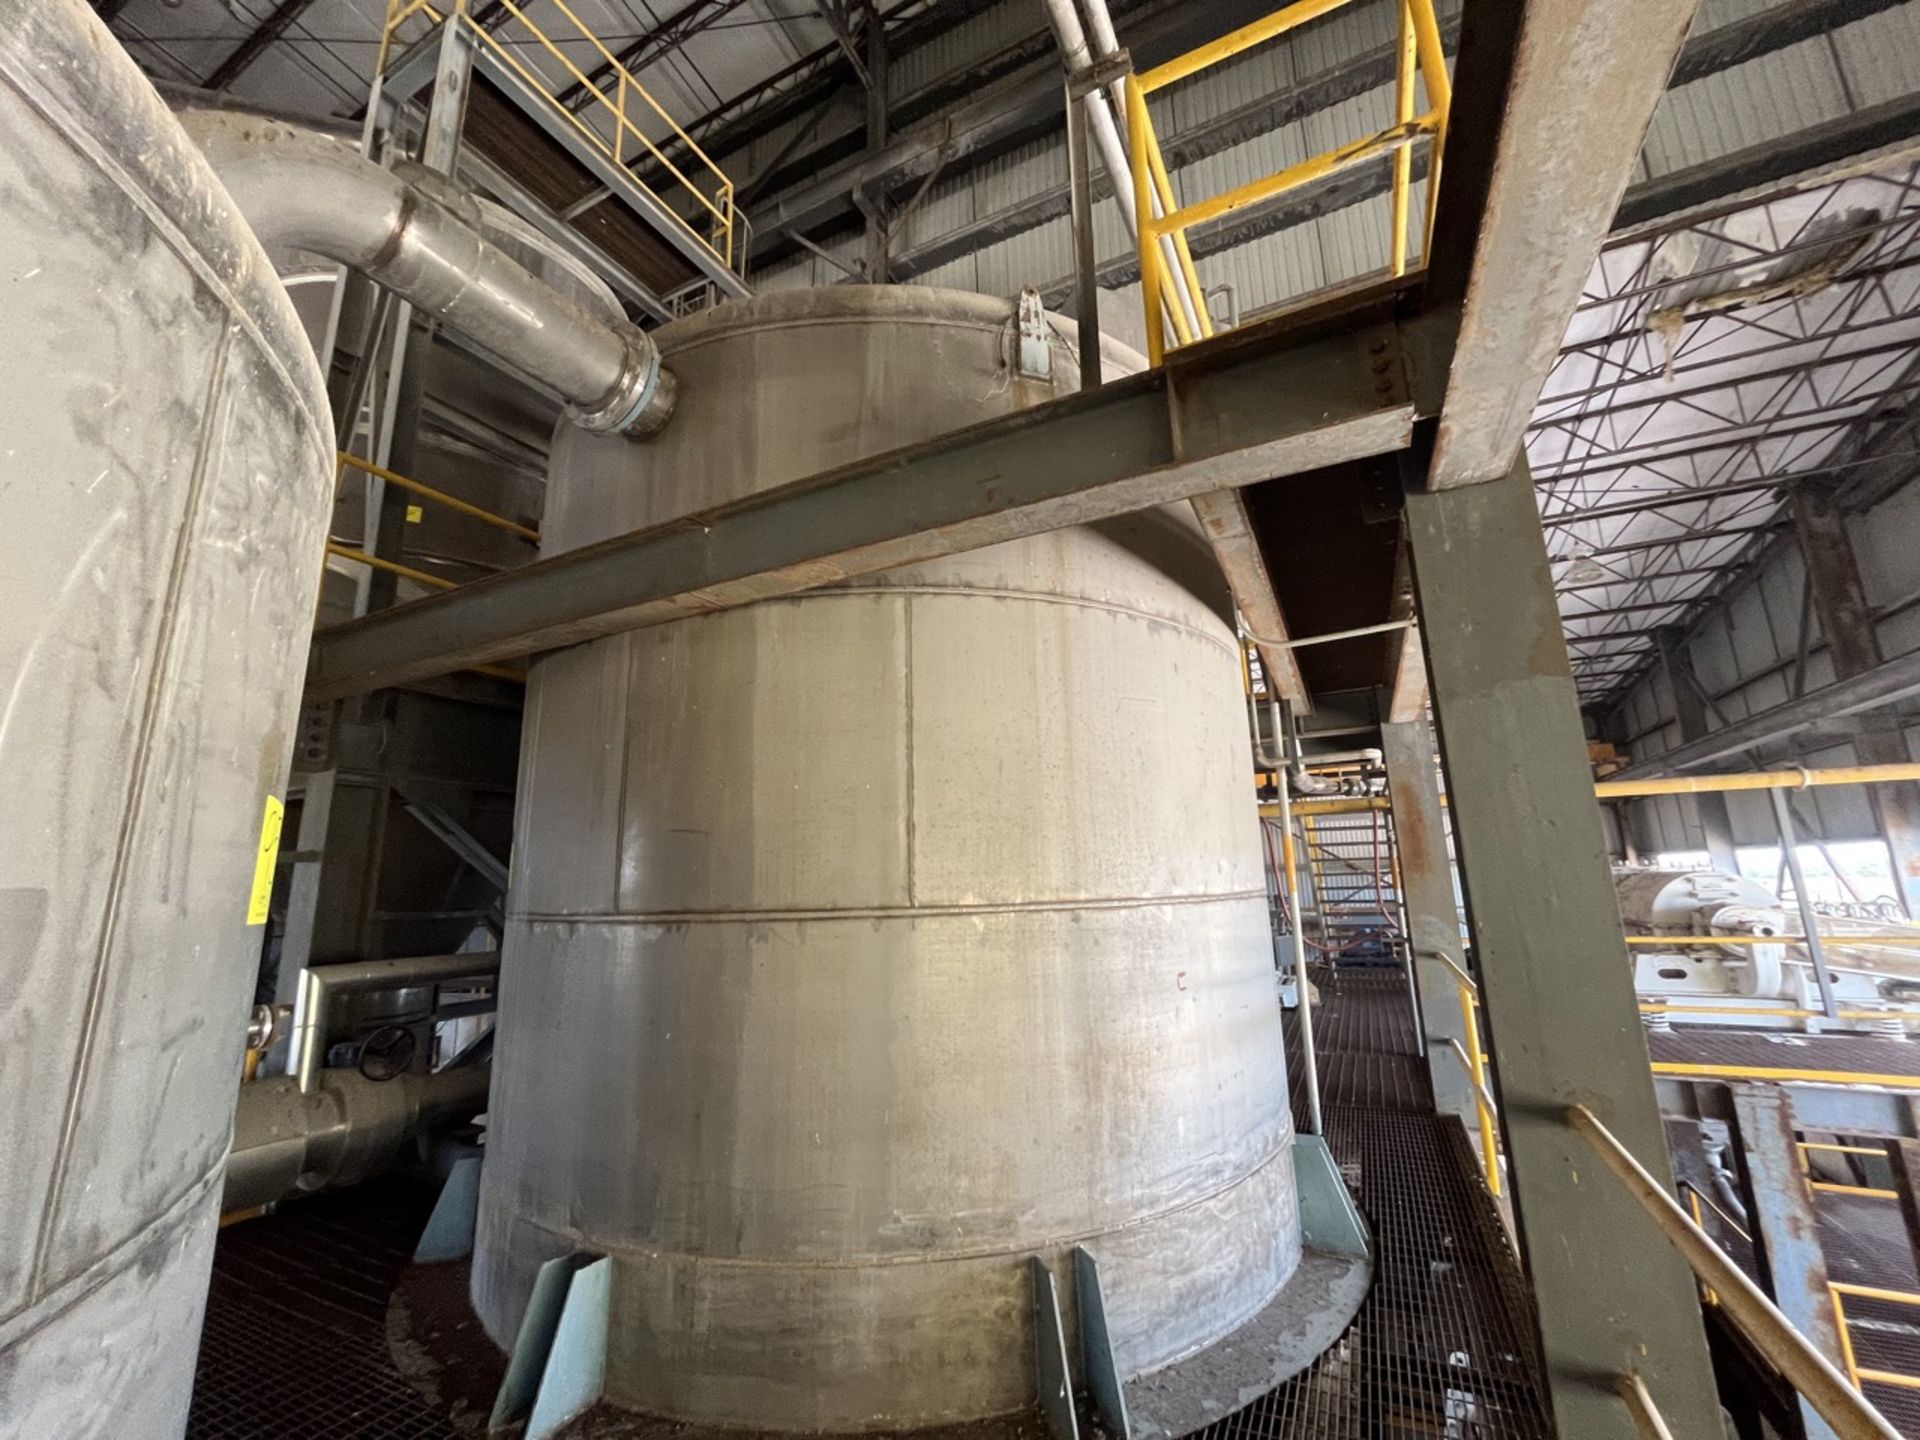 Conical storage tank with stainless steel toriesferica lid measures approximately 4.30 meters in di - Image 21 of 37